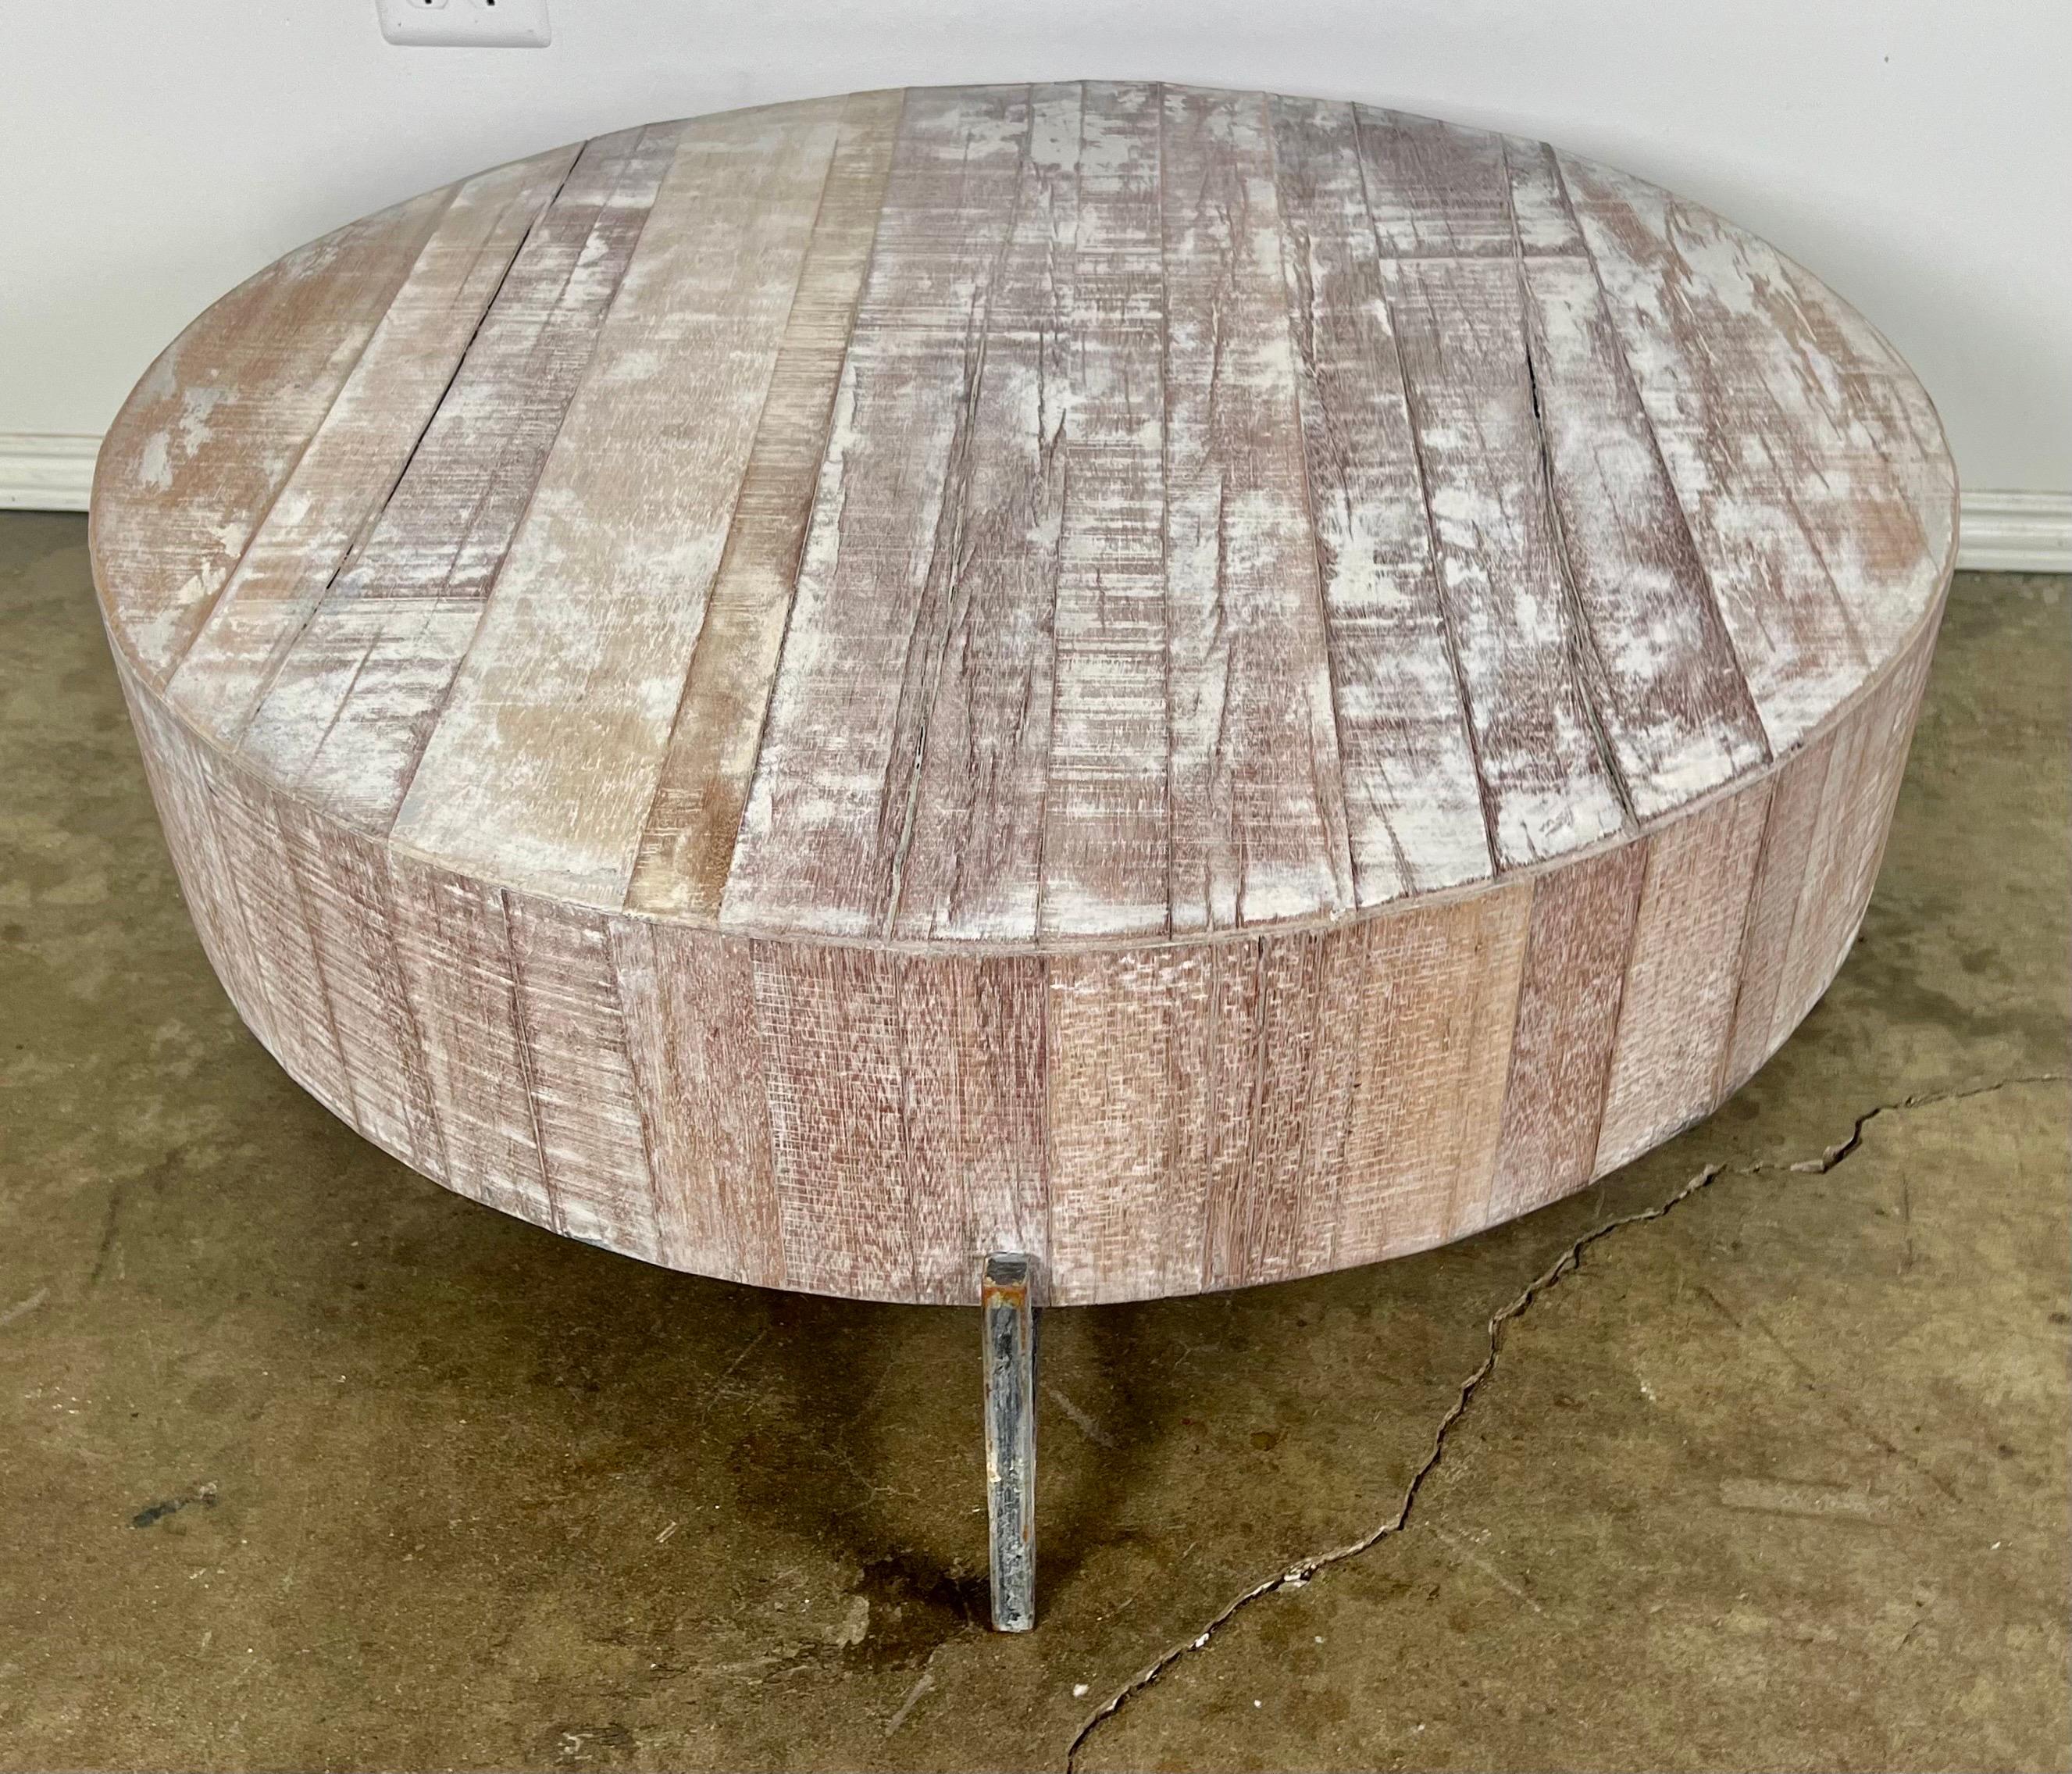 20th century round wood primitive coffee table with pewter colored metal legs.